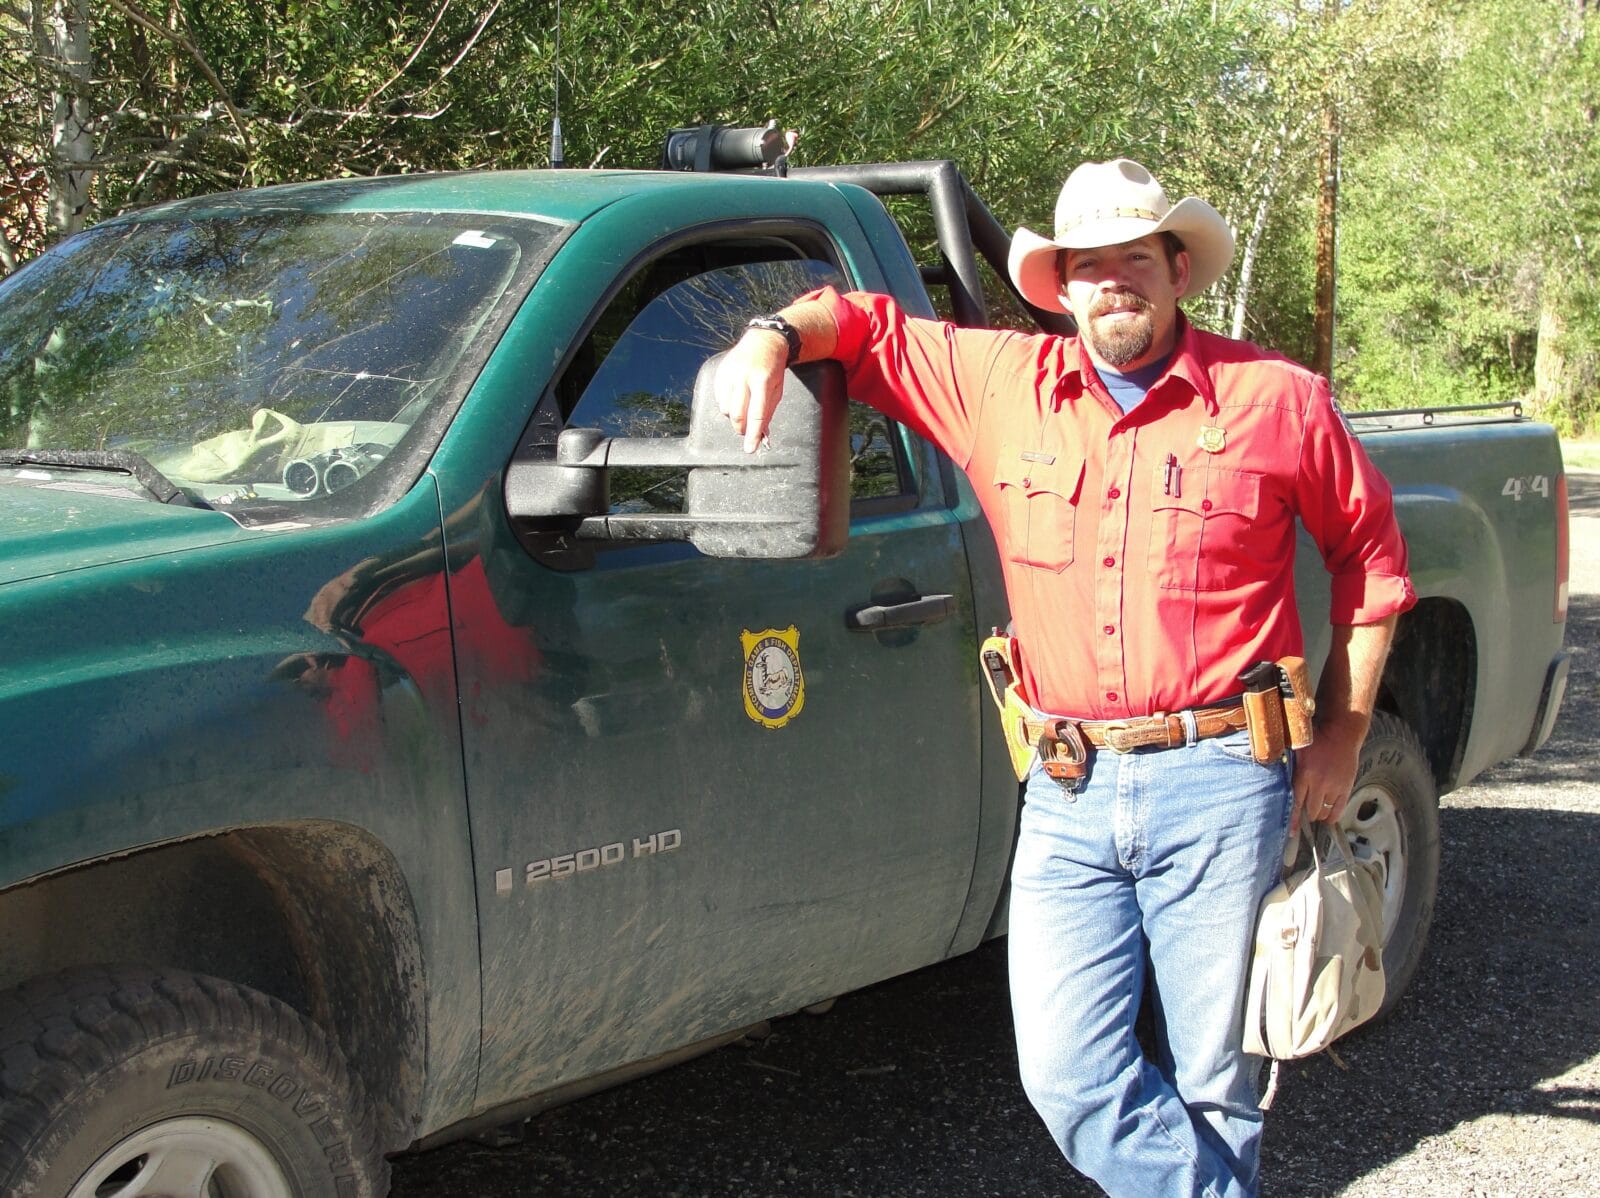 A game warden in a red shirt and cowboy hat poses for a photo in front of his green work truck.